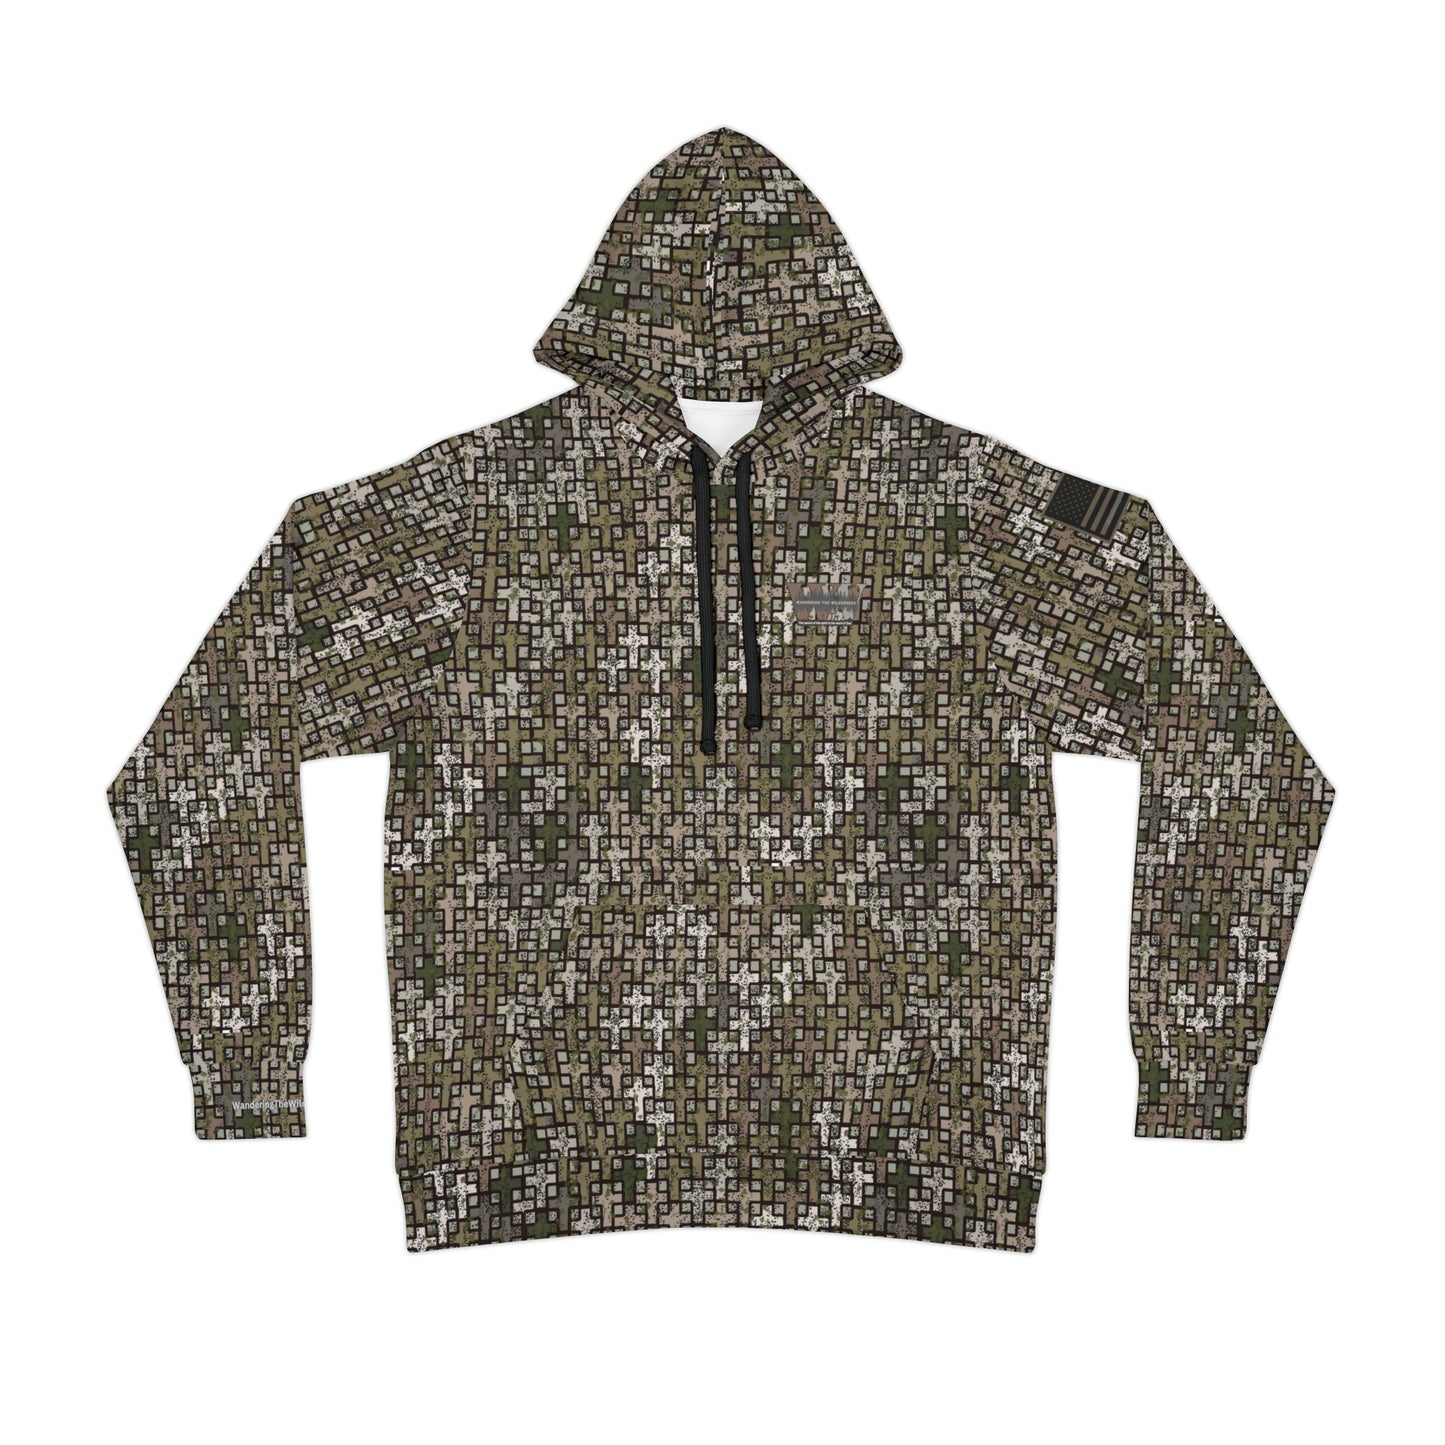 Wandering the Wilderness Hardscrabble camo unisex performance fabric Athletic Hoodie. These tend to run small so order one size larger than you normally wear, also these are made to order and could take two weeks or longer to be delivered.